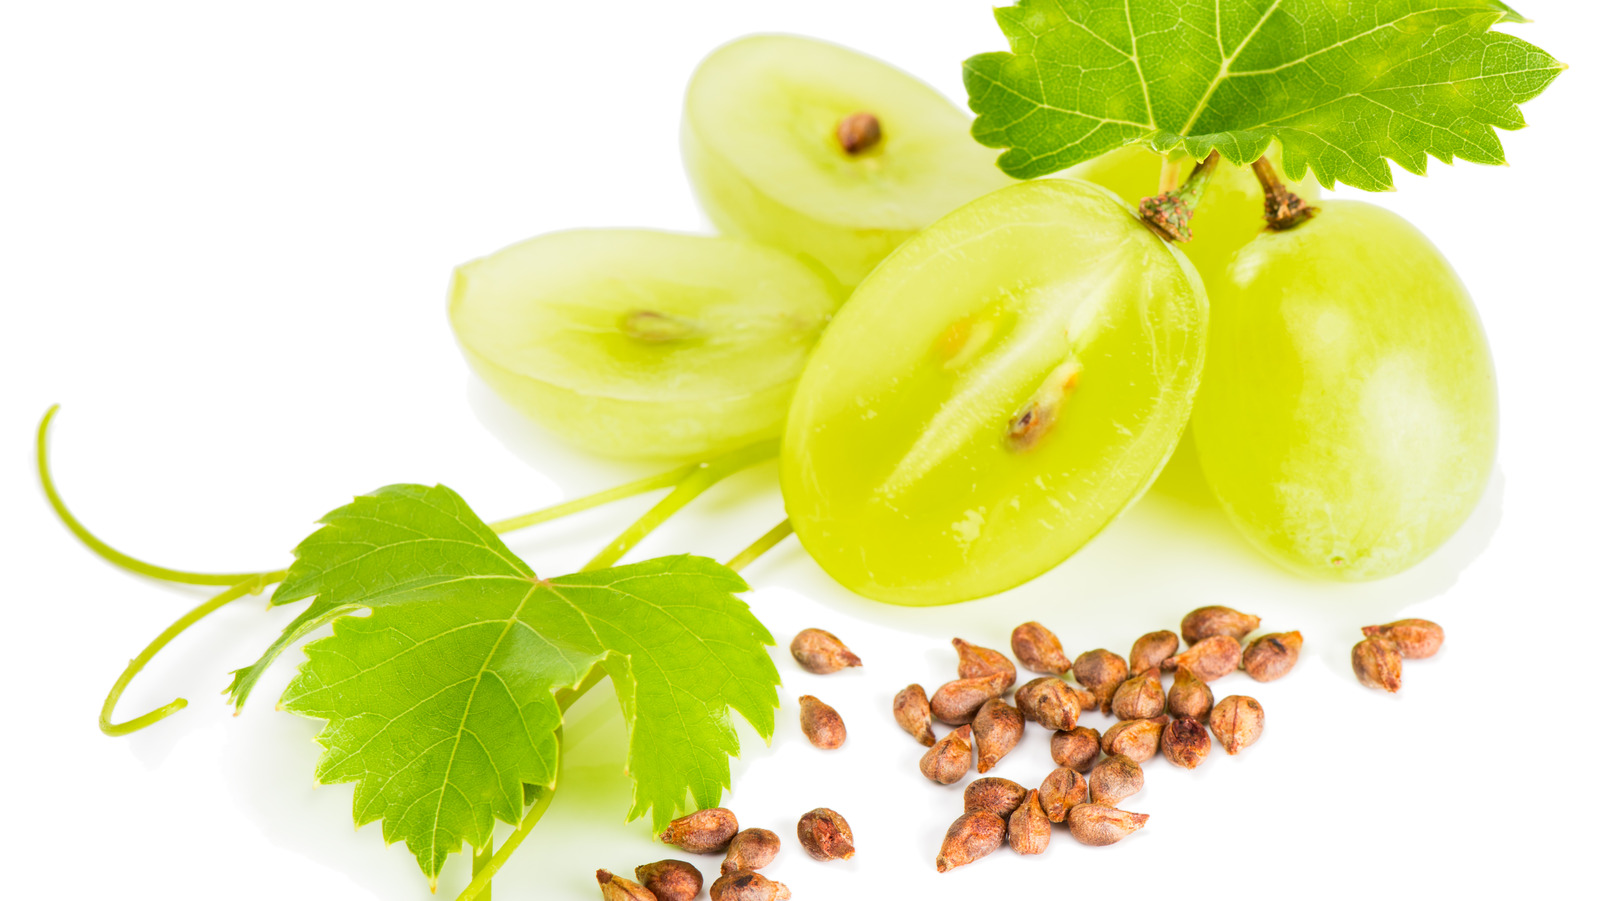 How To Eat Grapes With Seeds